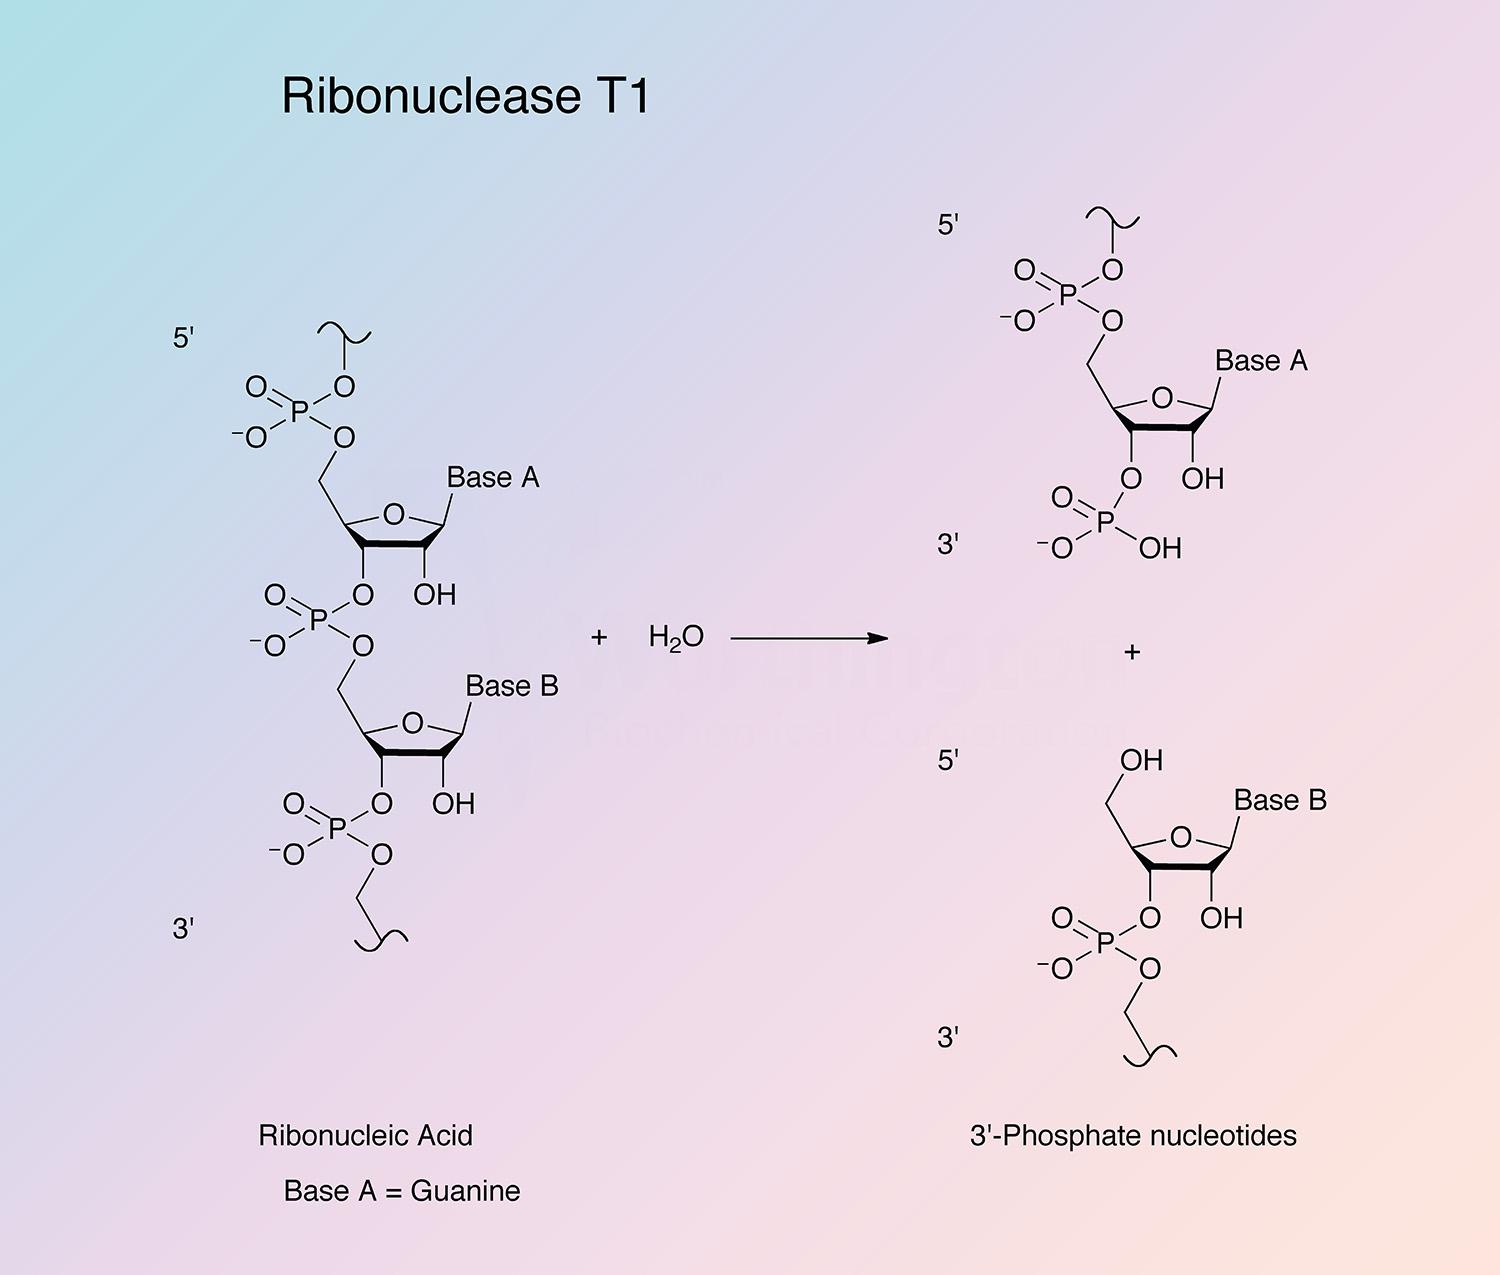 Ribonuclease T1 Enzymatic Reaction